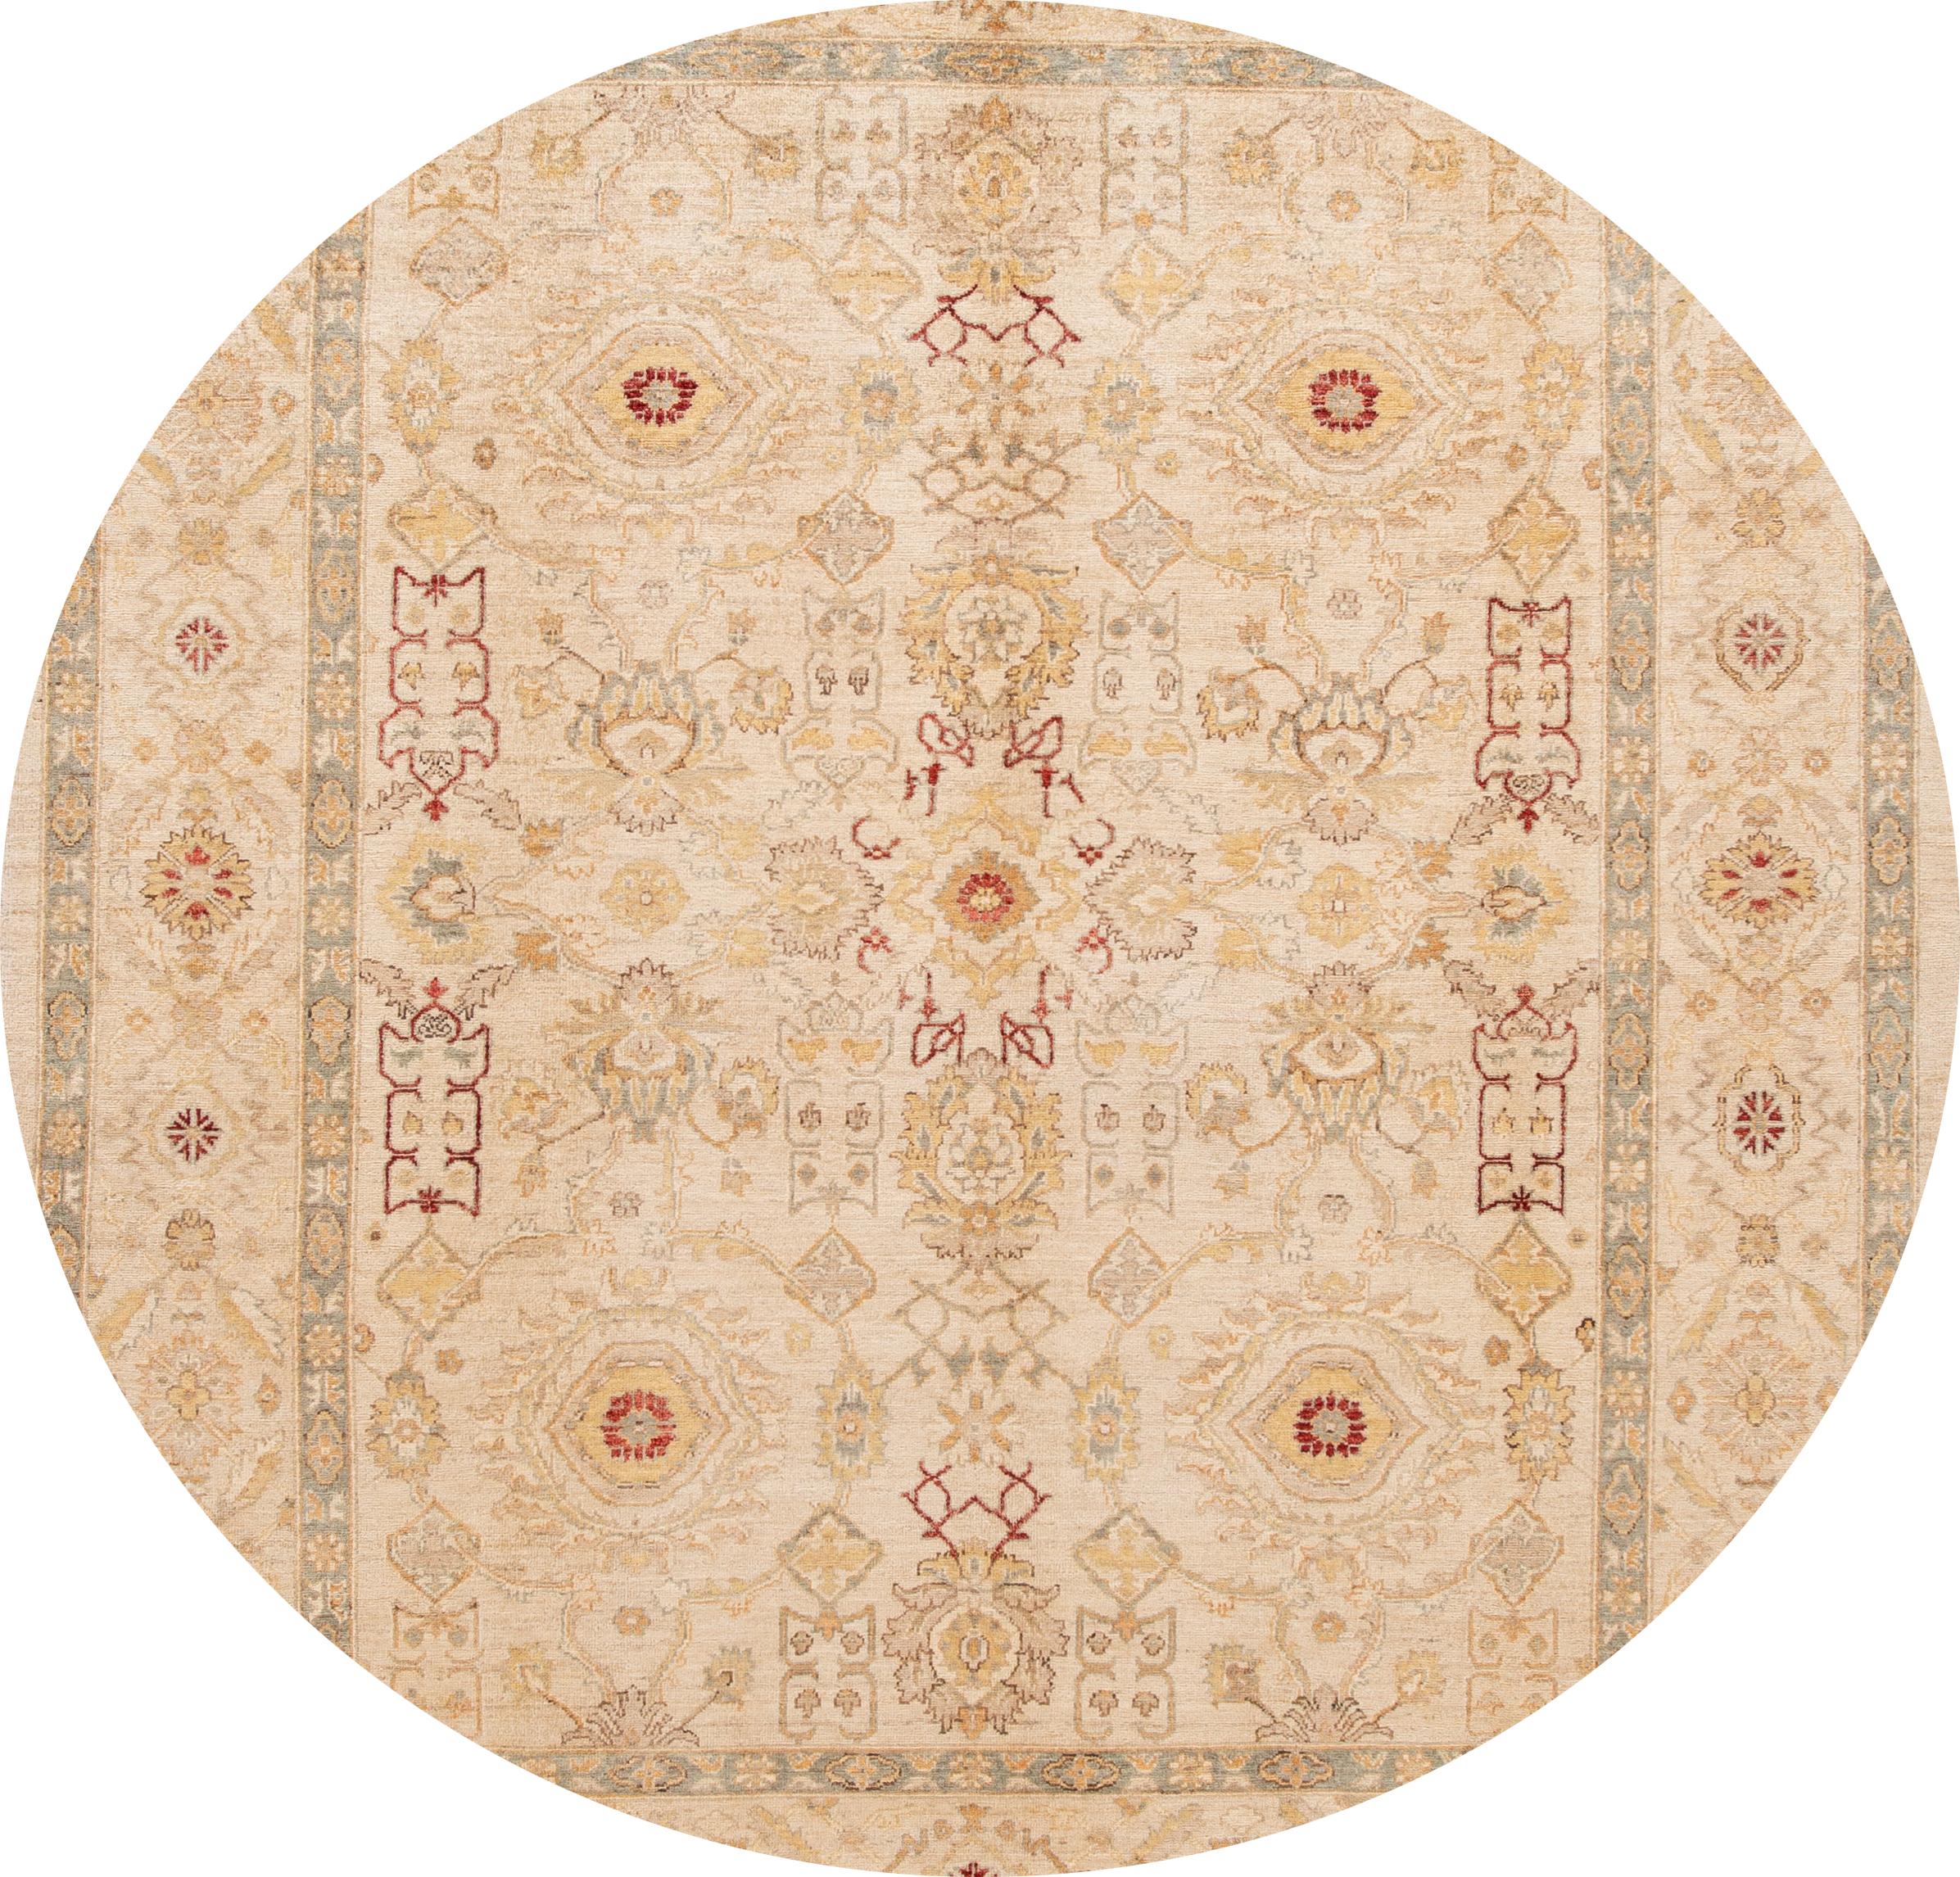 Beautiful contemporary Paki Peshawar rug, hand-knotted wool with a beige field, and multi-color accents in an all-over floral design.
This rug measures: 8'1